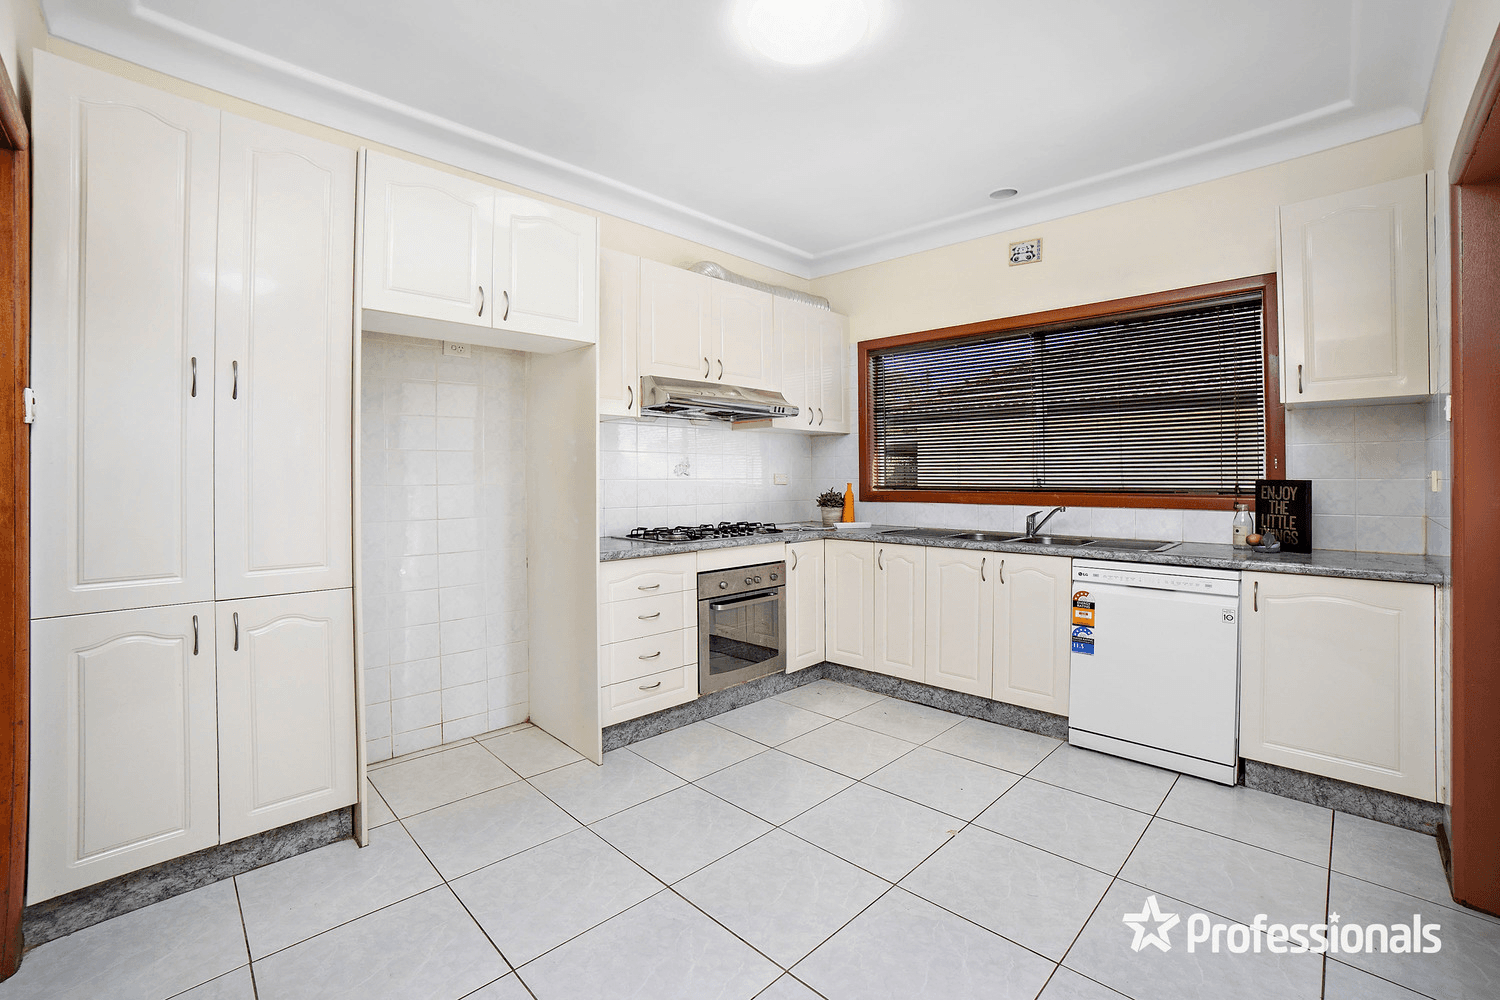 123 Doyle Road, Padstow, NSW 2211